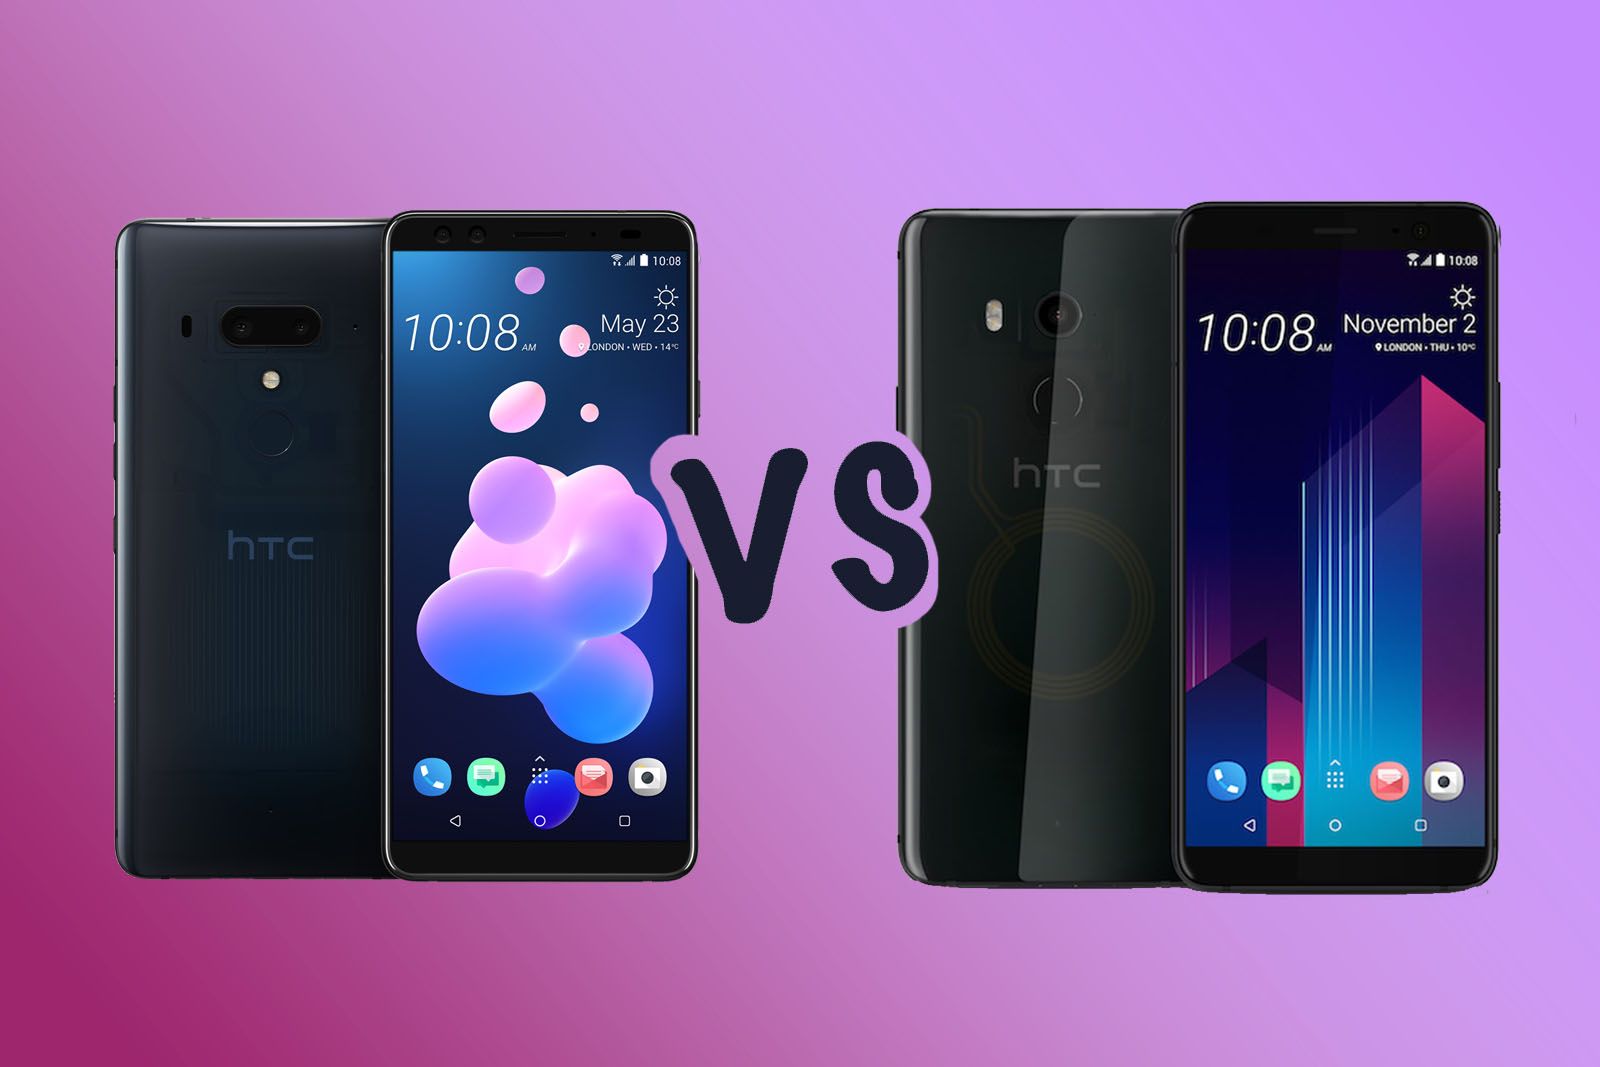 Htc U12 Vs Htc U11 What’s The Difference image 1